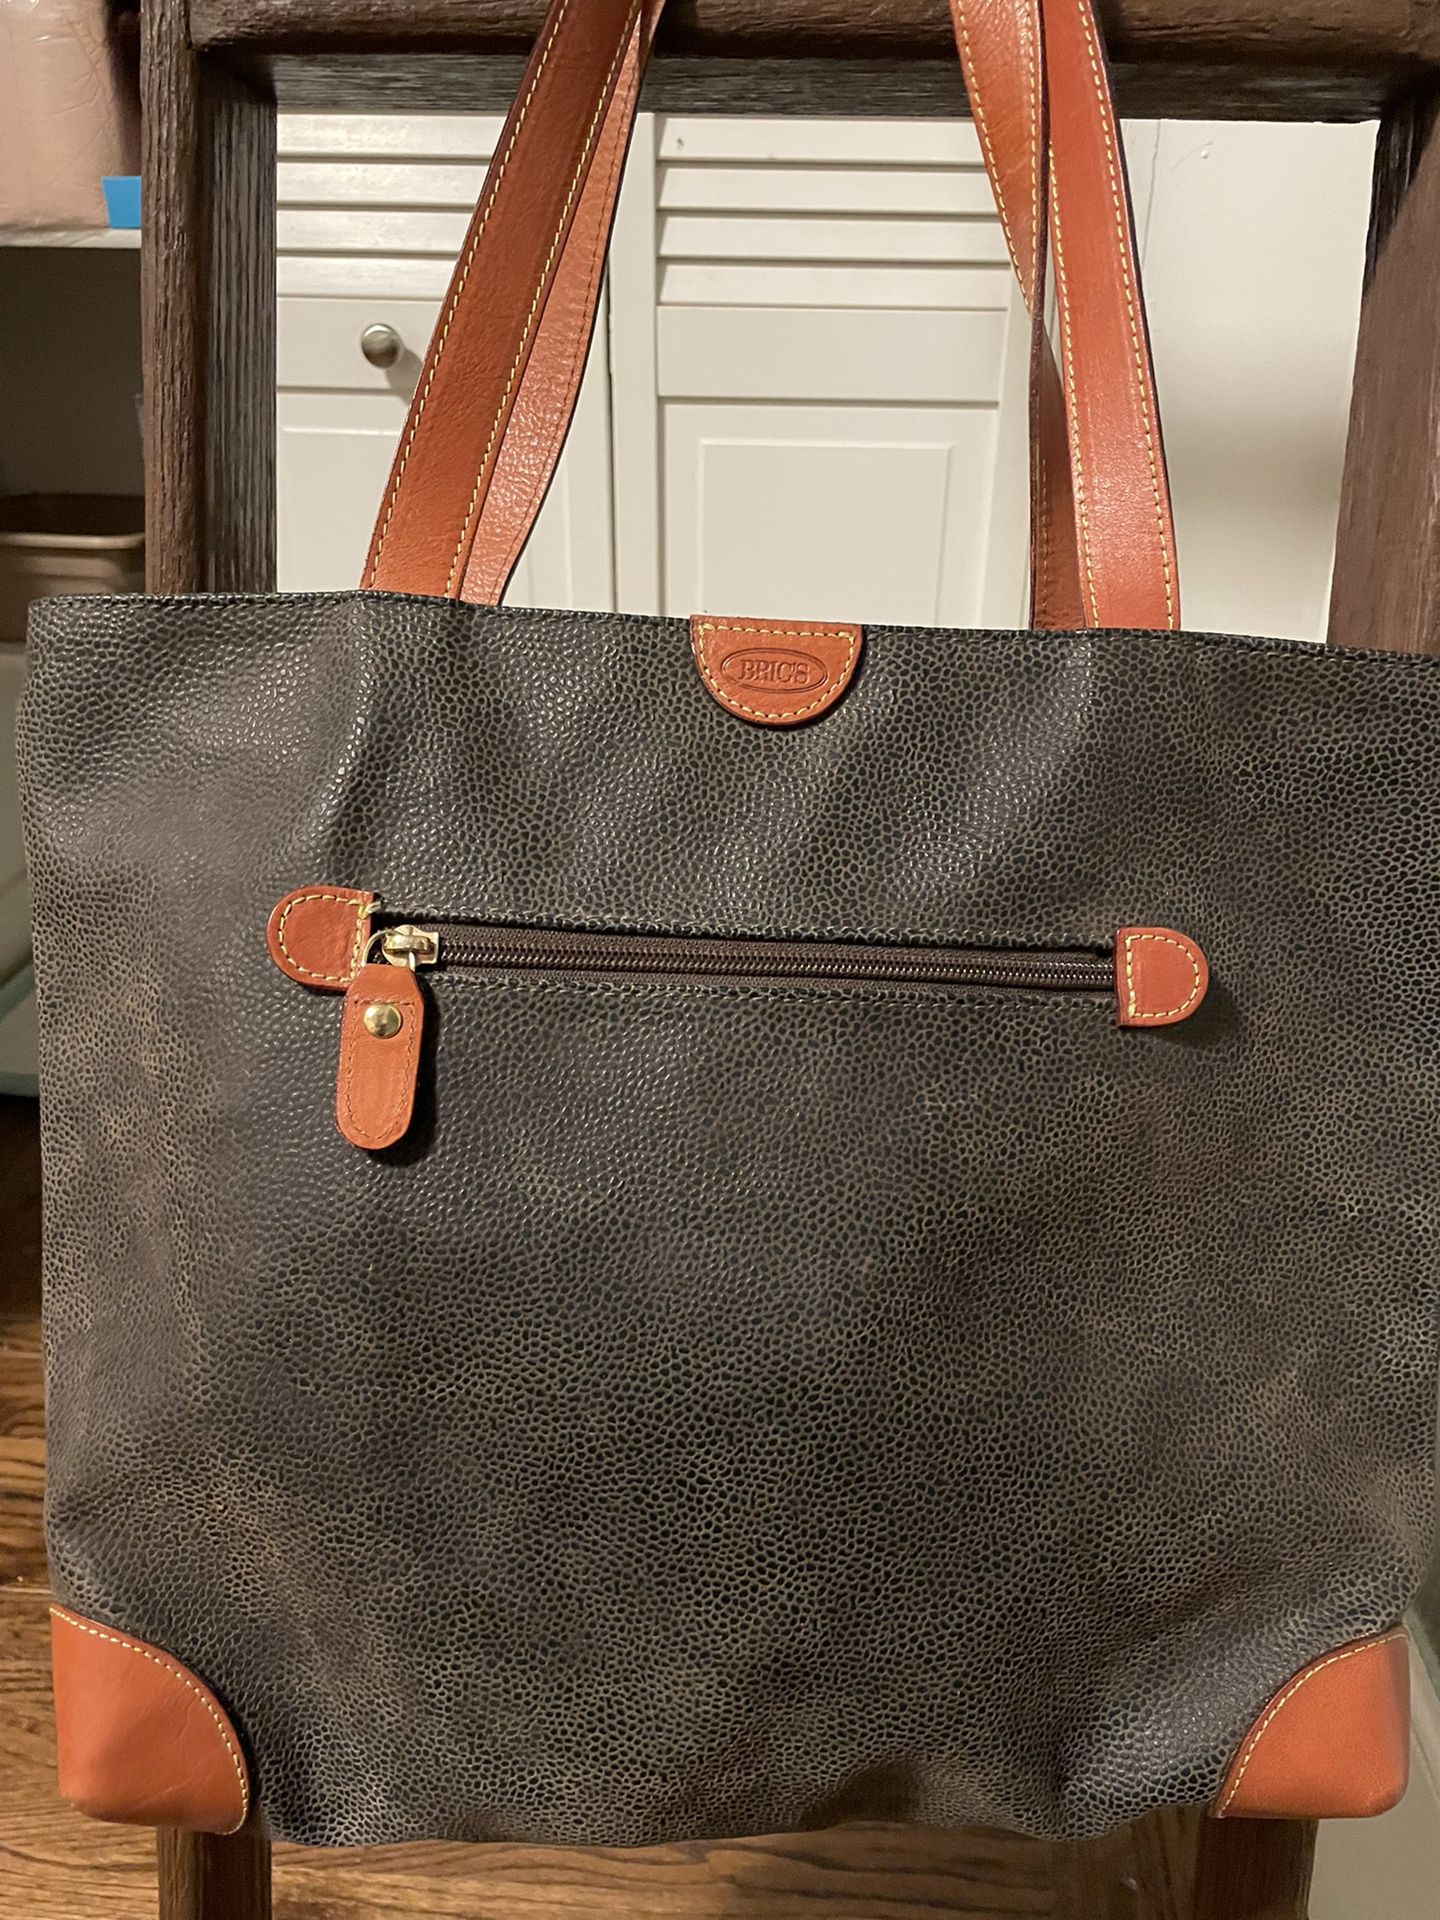 Bric’s Tote Leather Bag